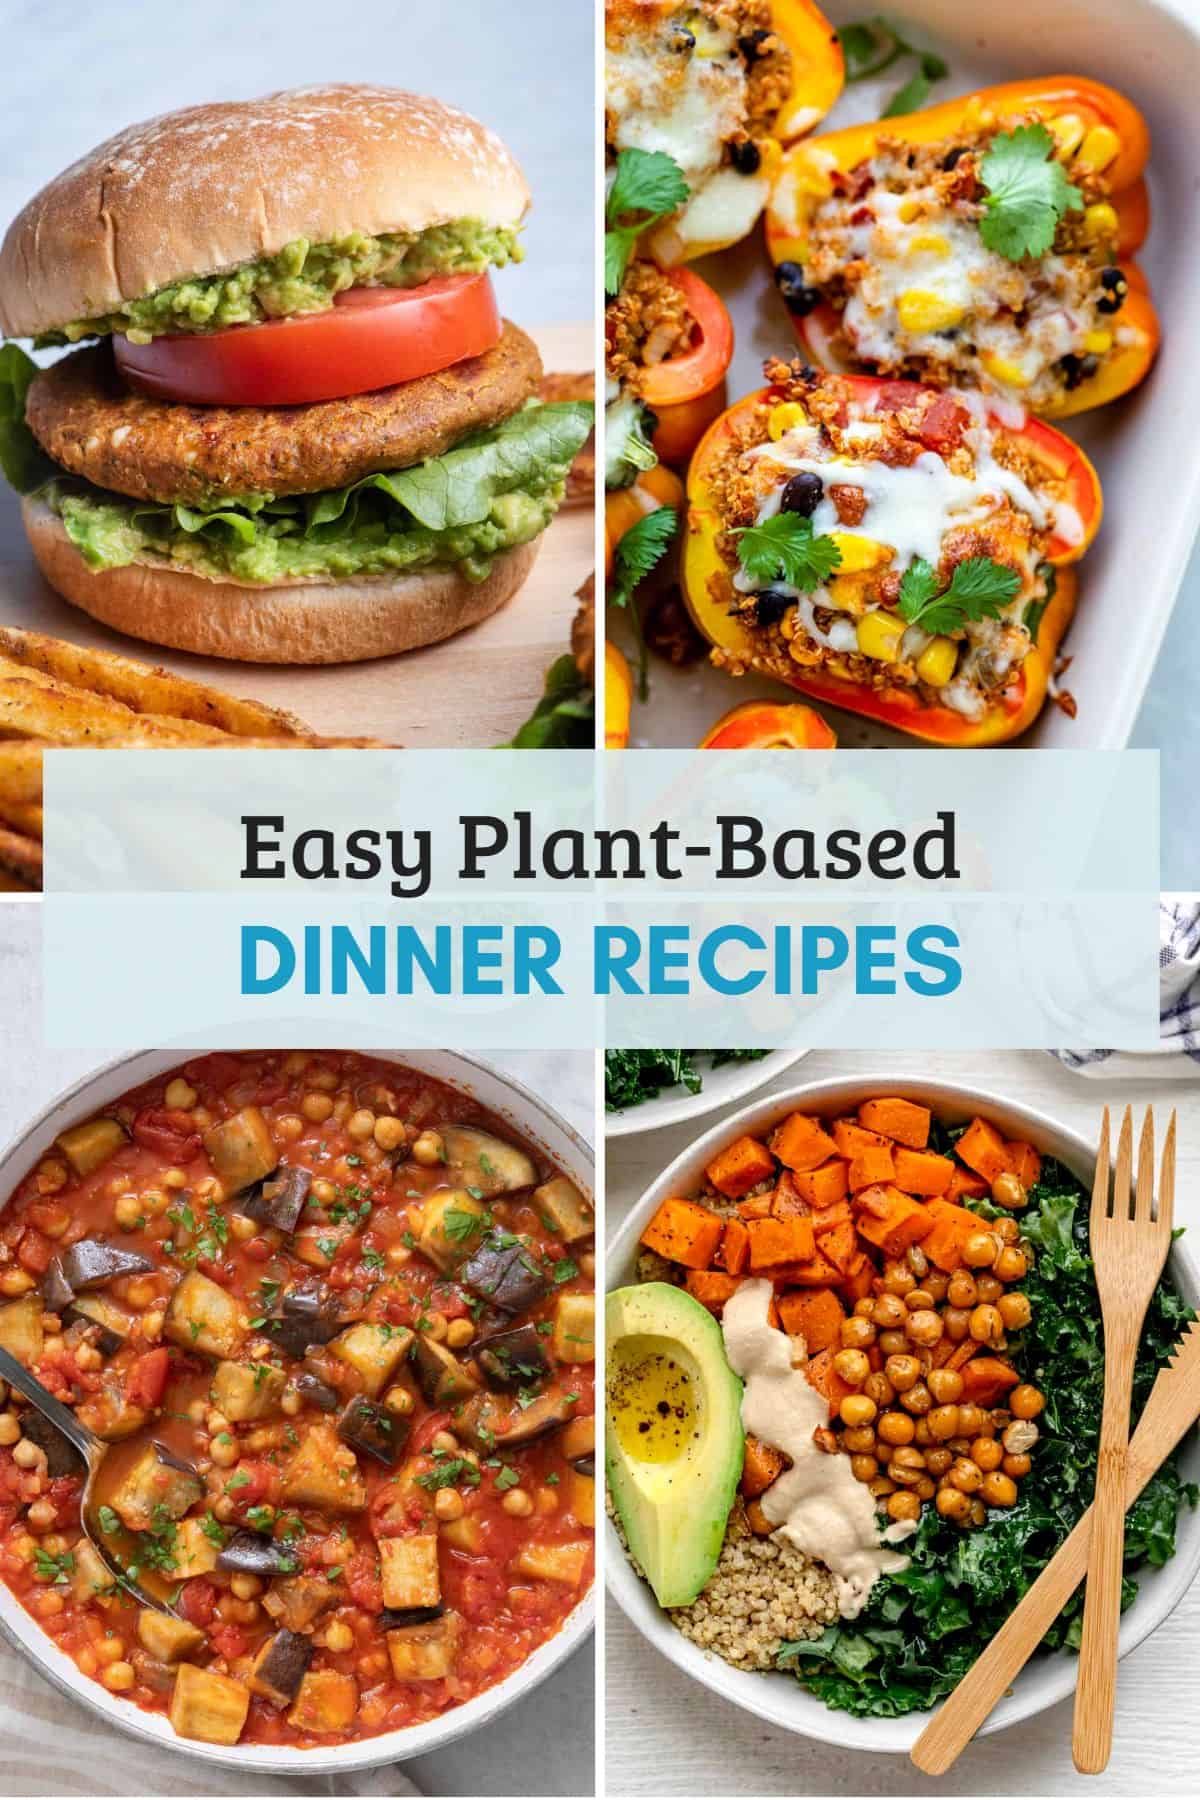 https://feelgoodfoodie.net/wp-content/uploads/2023/02/Plant_Based_Dinner_Recipes_Featured.jpg